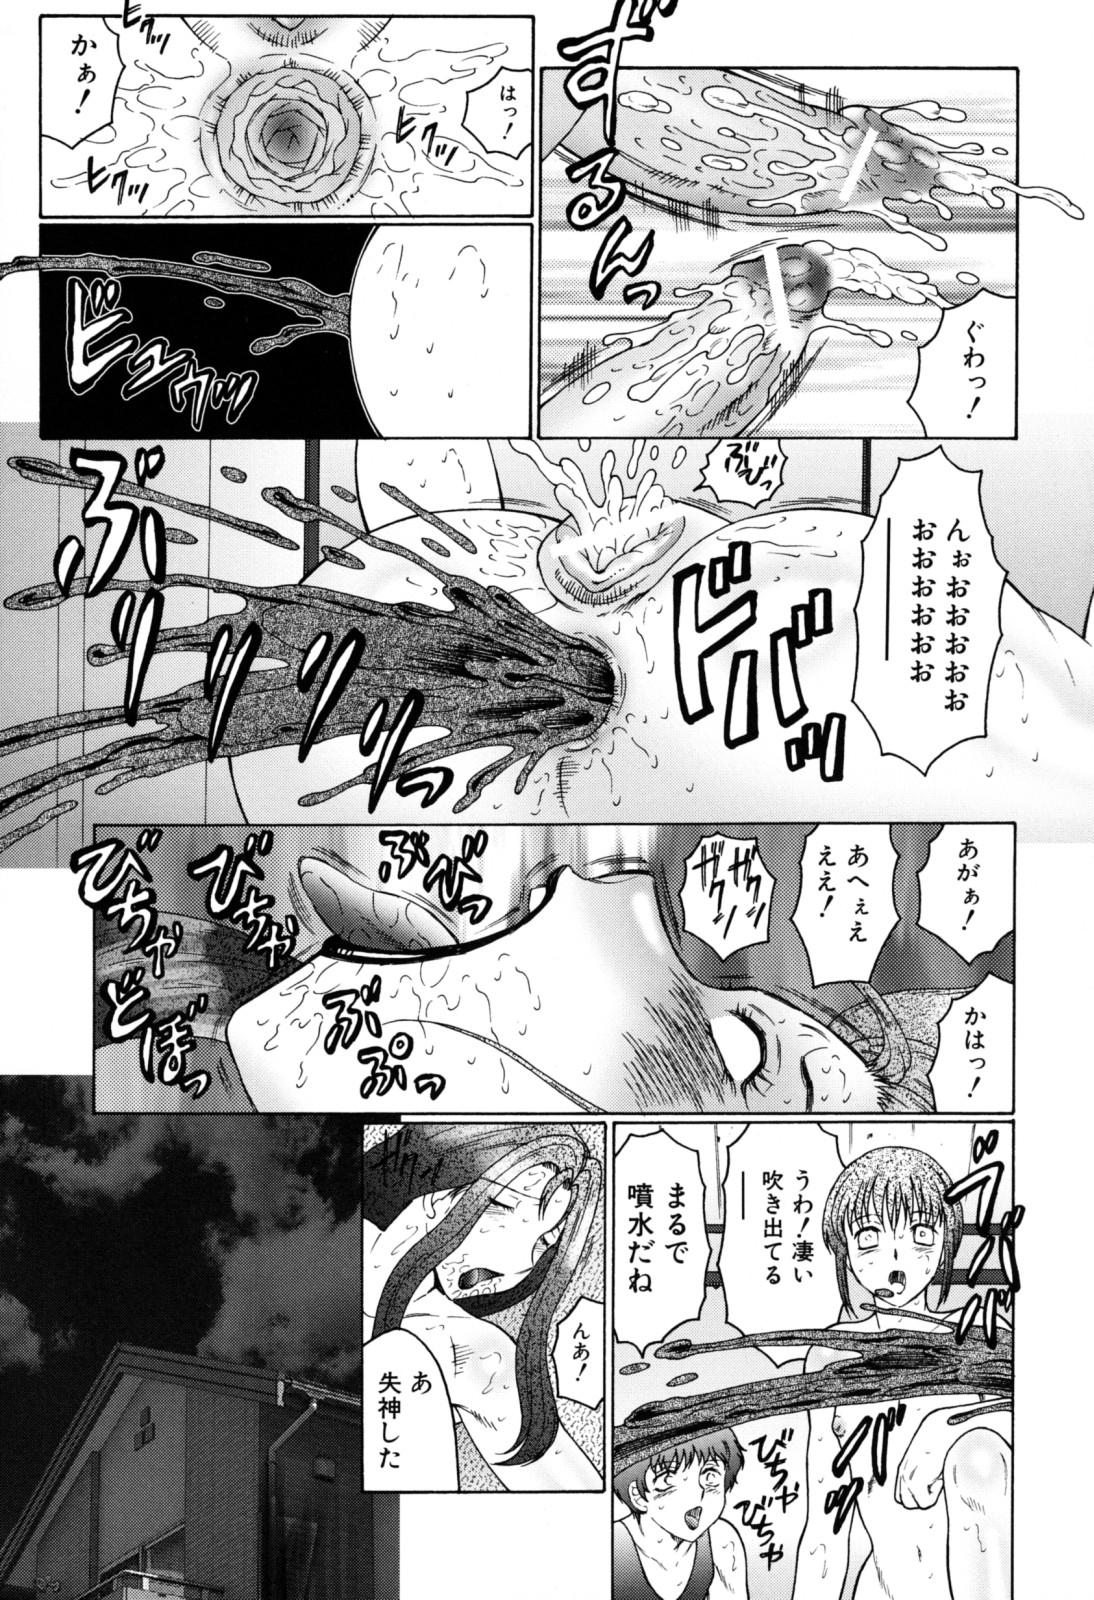 Boshino Toriko - The Captive of Mother and the Son 190